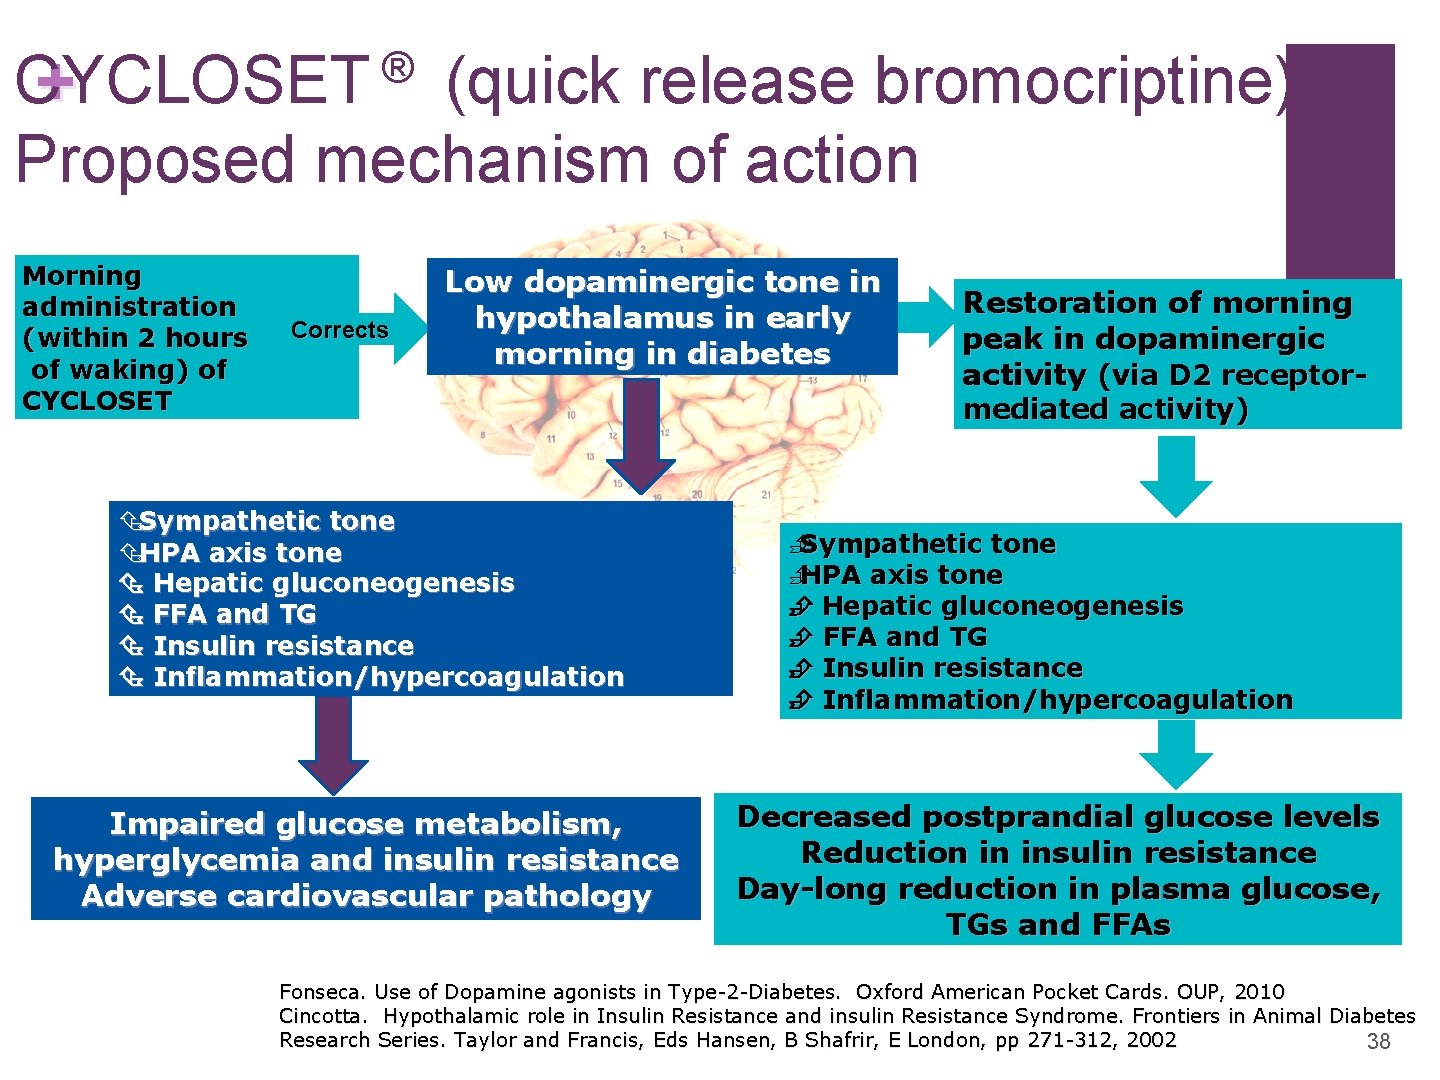 + ® CYCLOSET (quick release bromocriptine): Proposed mechanism of action Morning administration (within 2